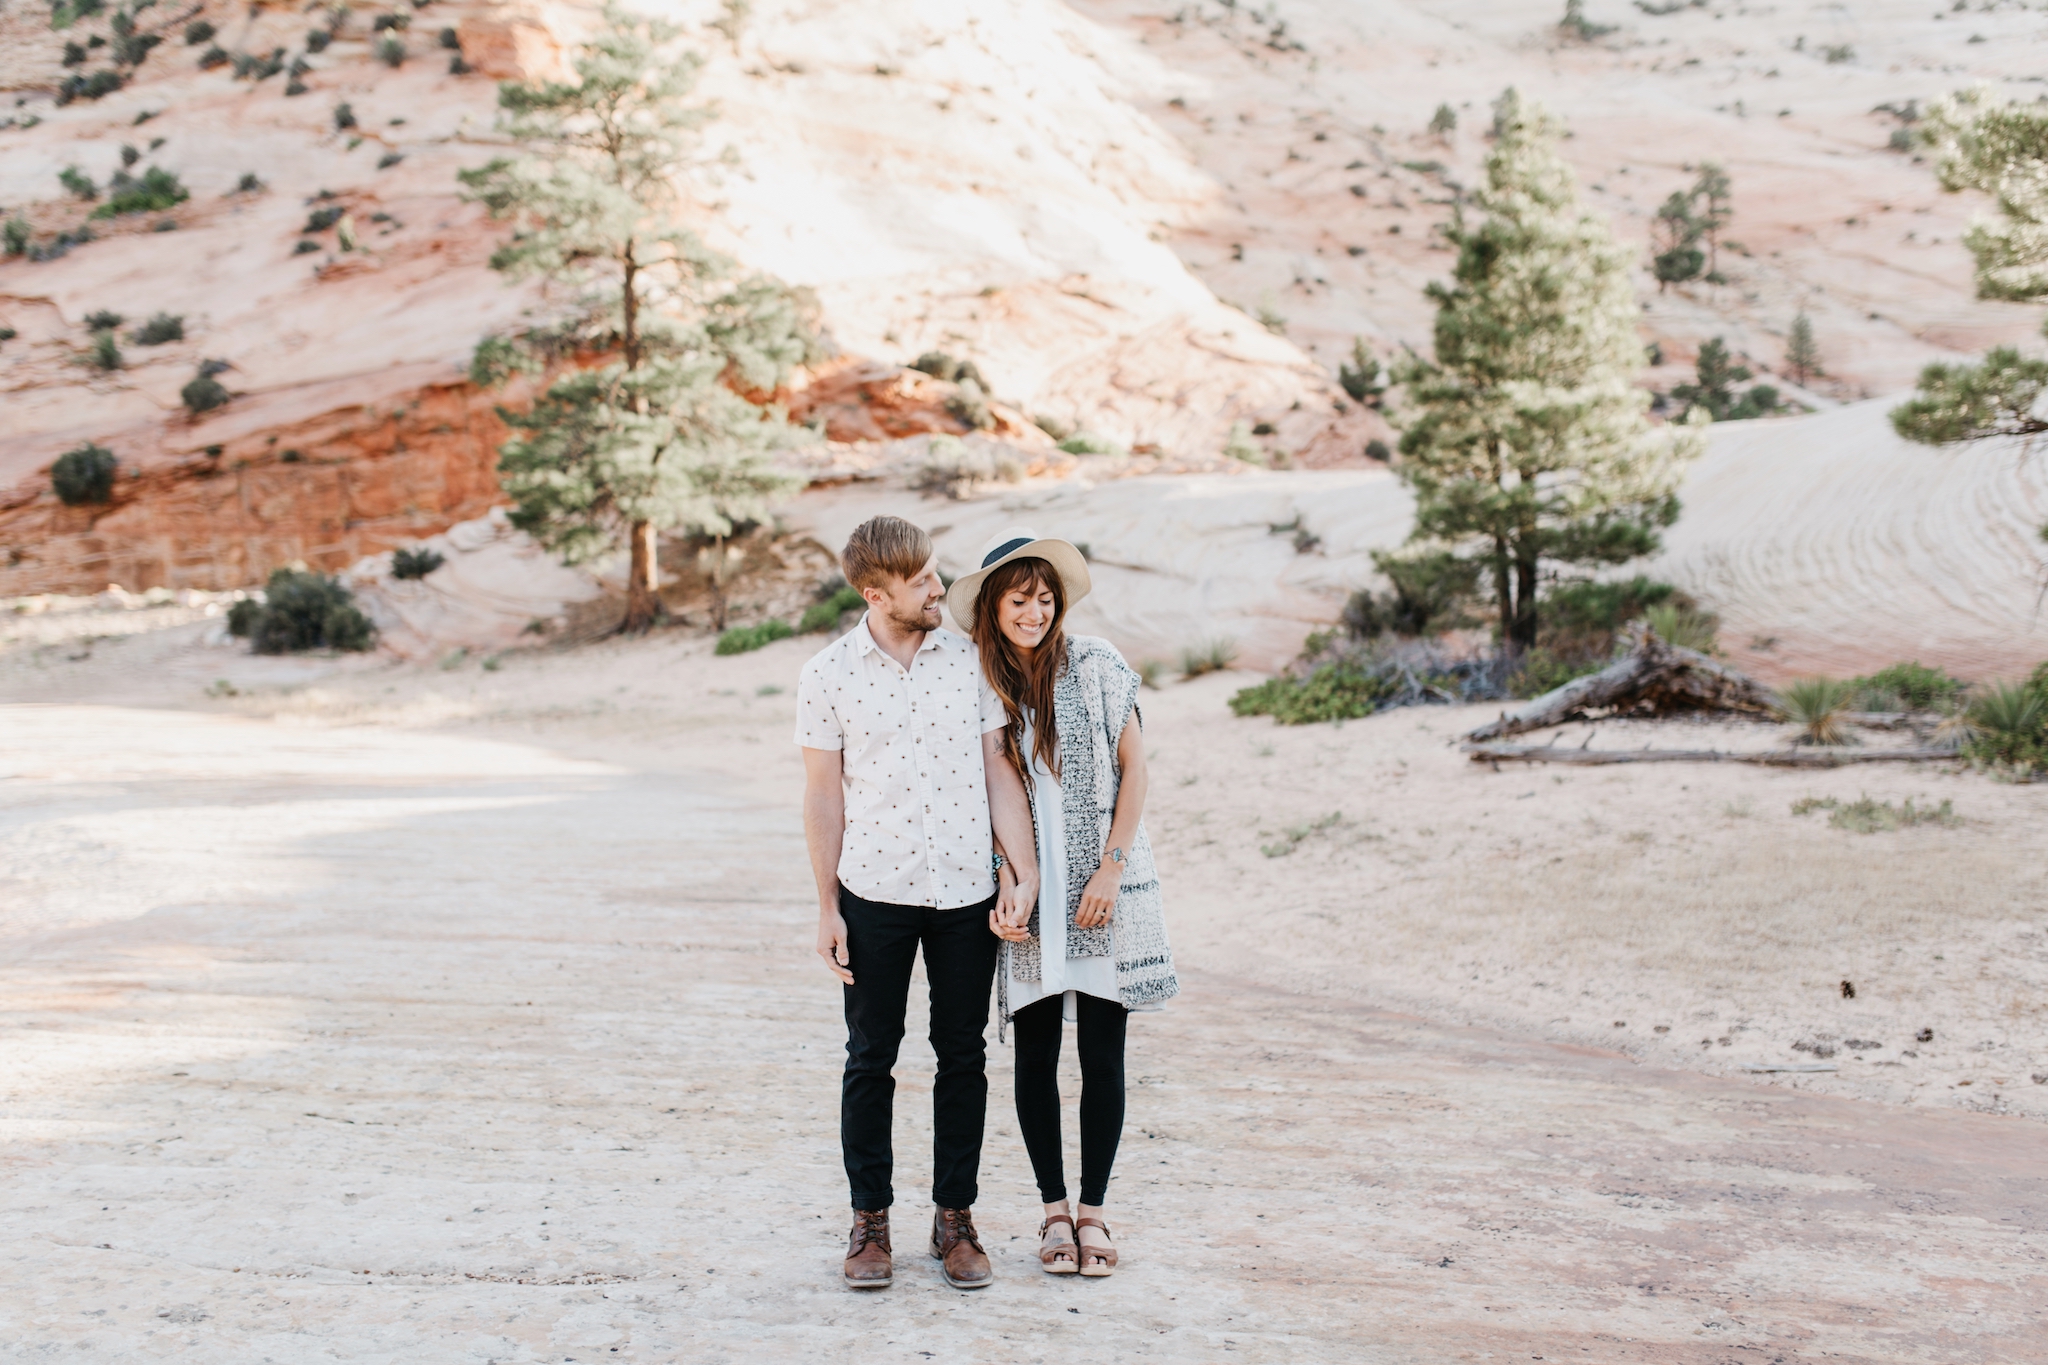 zion - engagement - photography 160.jpg